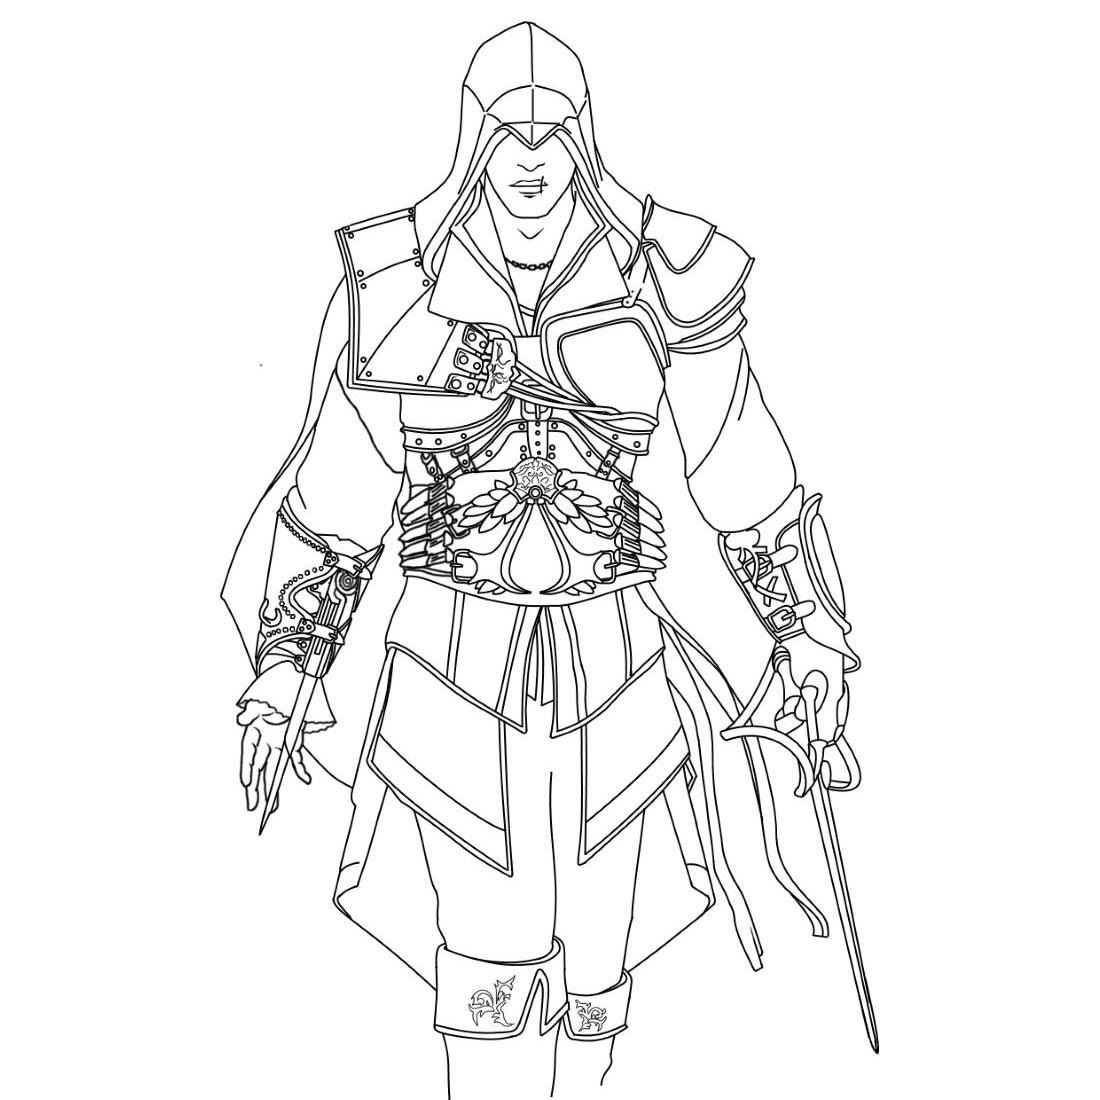 Assassin's Creed Coloring Pages Pdf to Print - Assassins Creed Coloring Pages Ezio Auditore de Firenze